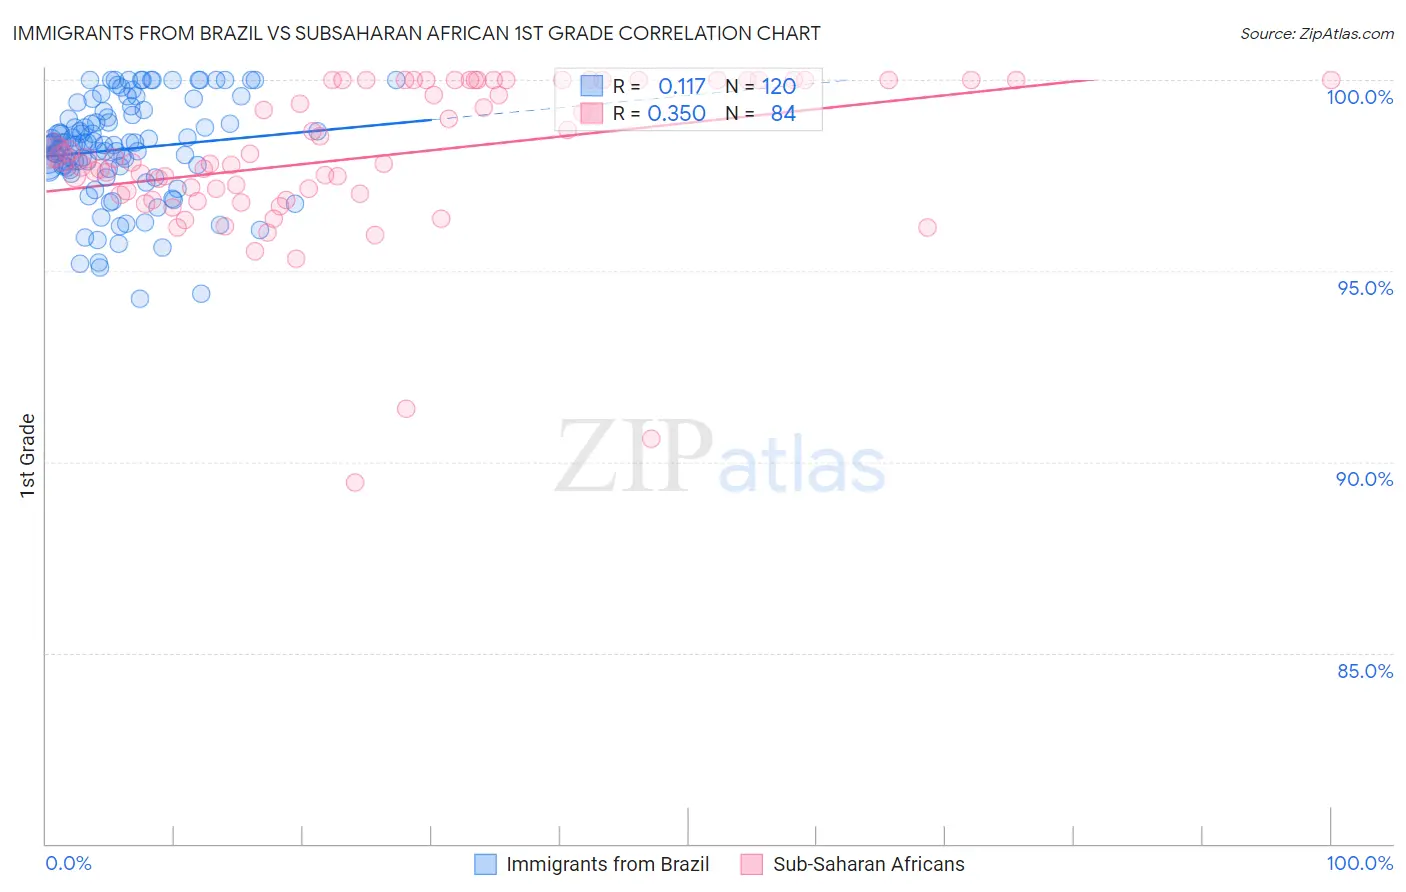 Immigrants from Brazil vs Subsaharan African 1st Grade